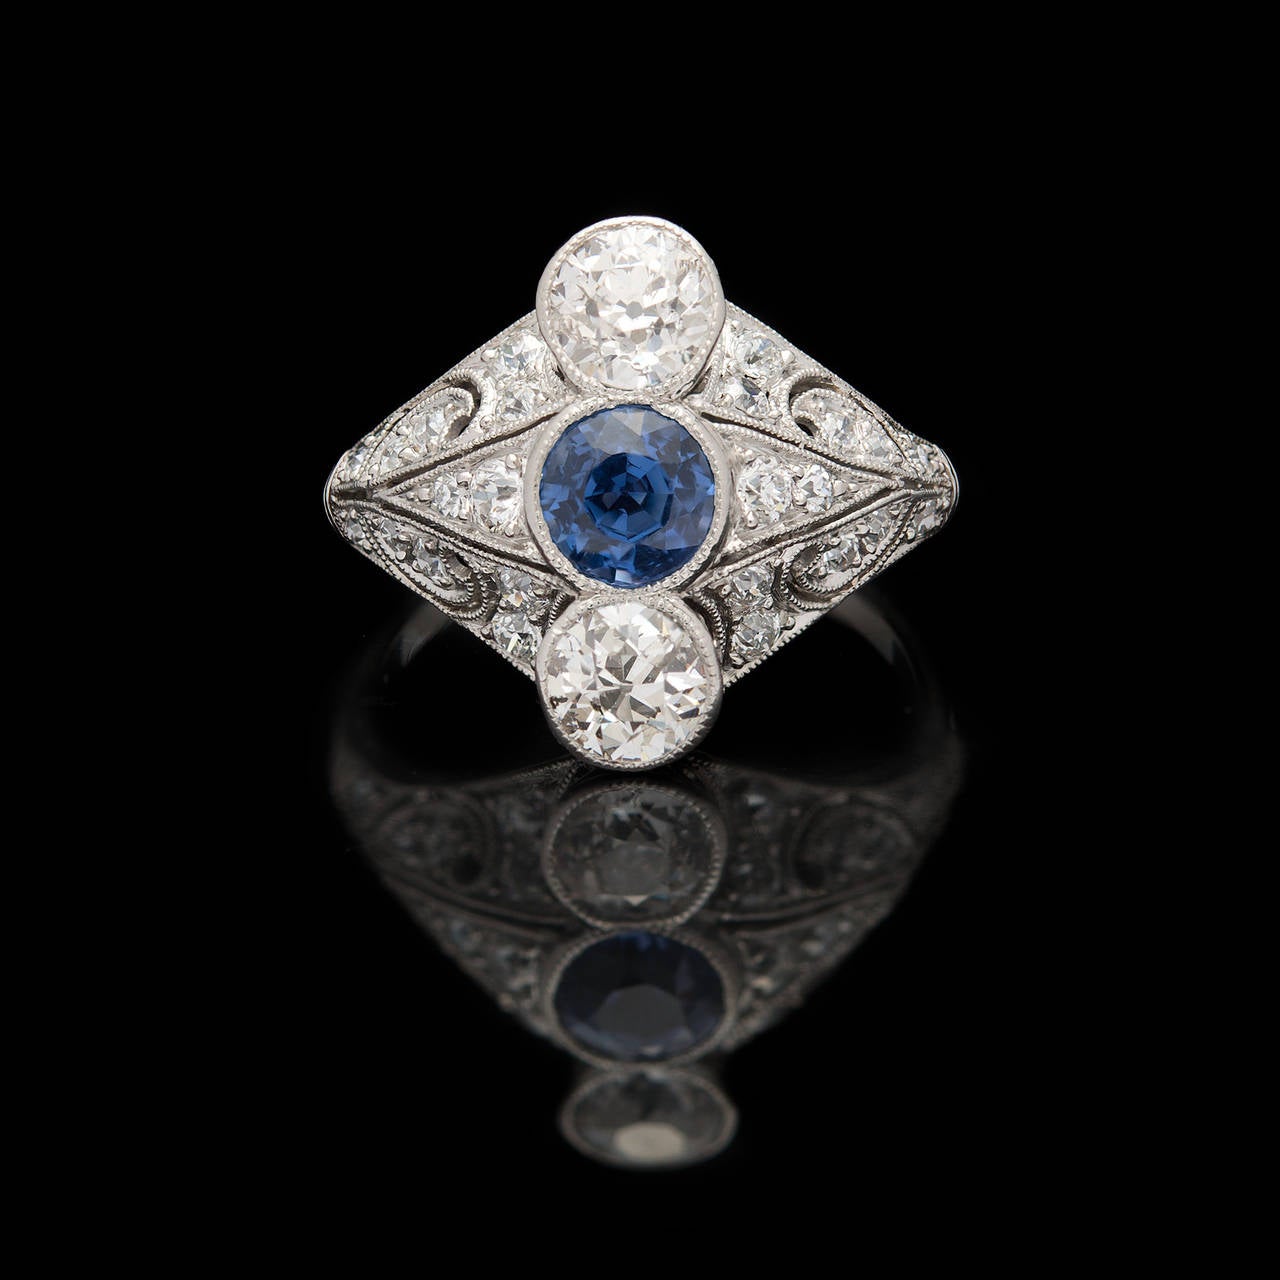 Edwardian Platinum Setting Features a 0.70ct Round Cut Blue Sapphire Flanked by 2 Old European Cut Diamonds and Enhanced by an additional 24 Round Cut Diamonds. The total approximate diamond carat weight is 1.30cts. The ring is a size 6.0 and weighs